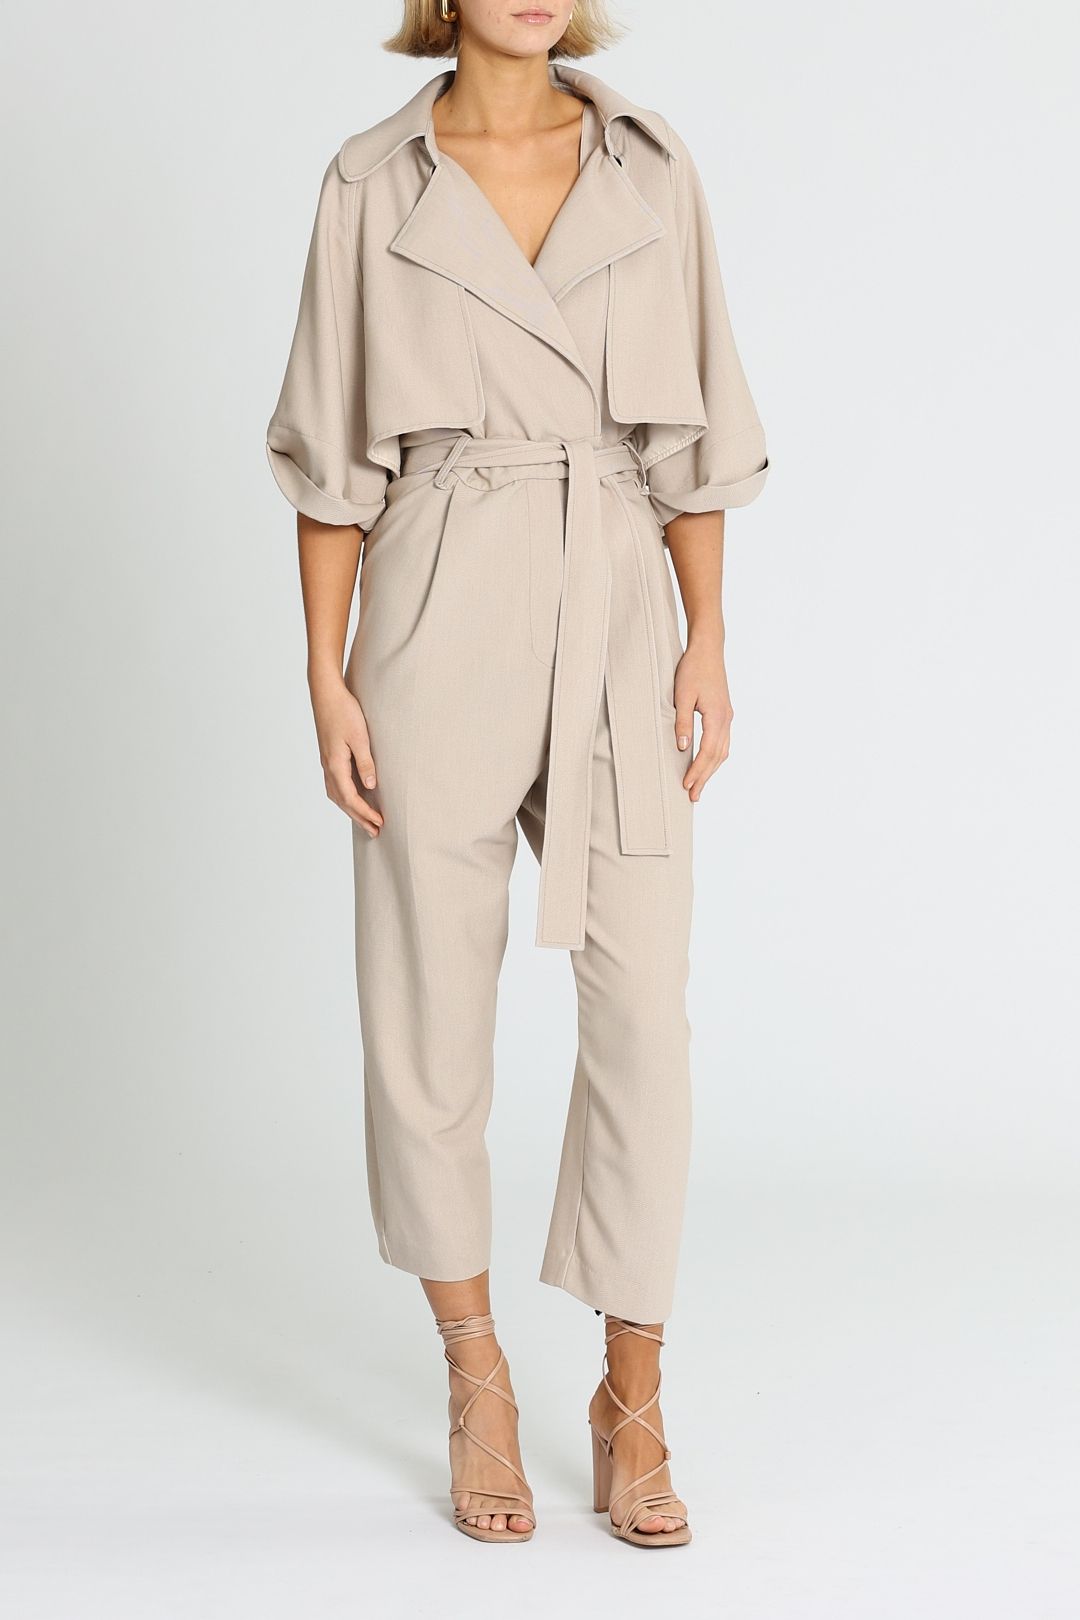 Camilla and Marc Mae Jumpsuit Nude